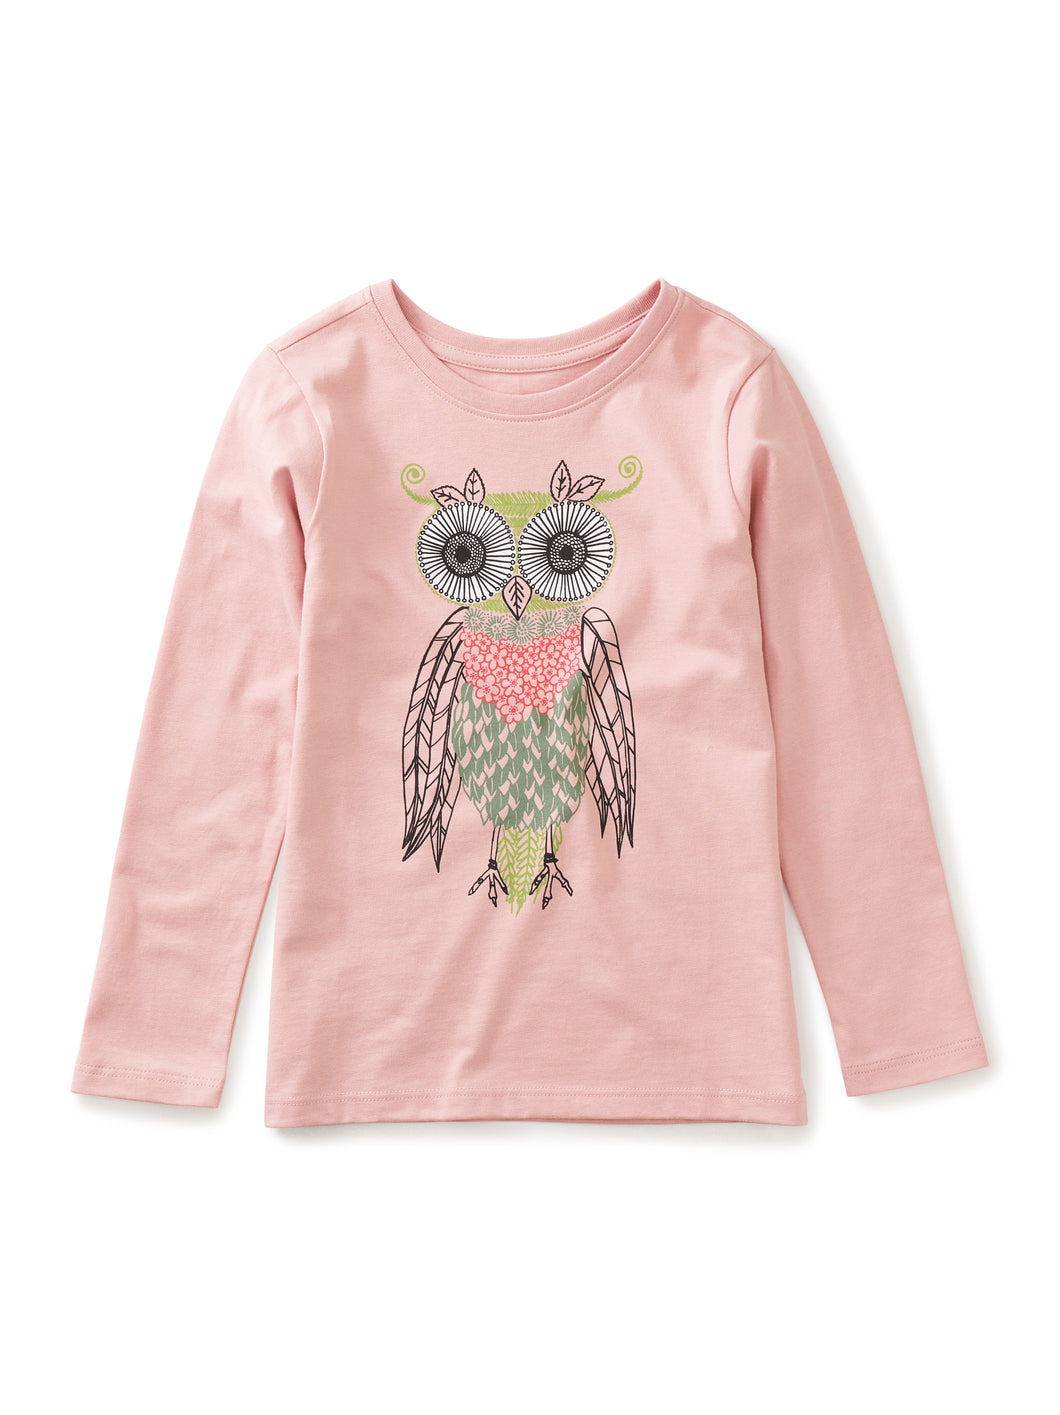 Tea Collection Long Sleeve Graphic Tee - Cameo Pink Owl